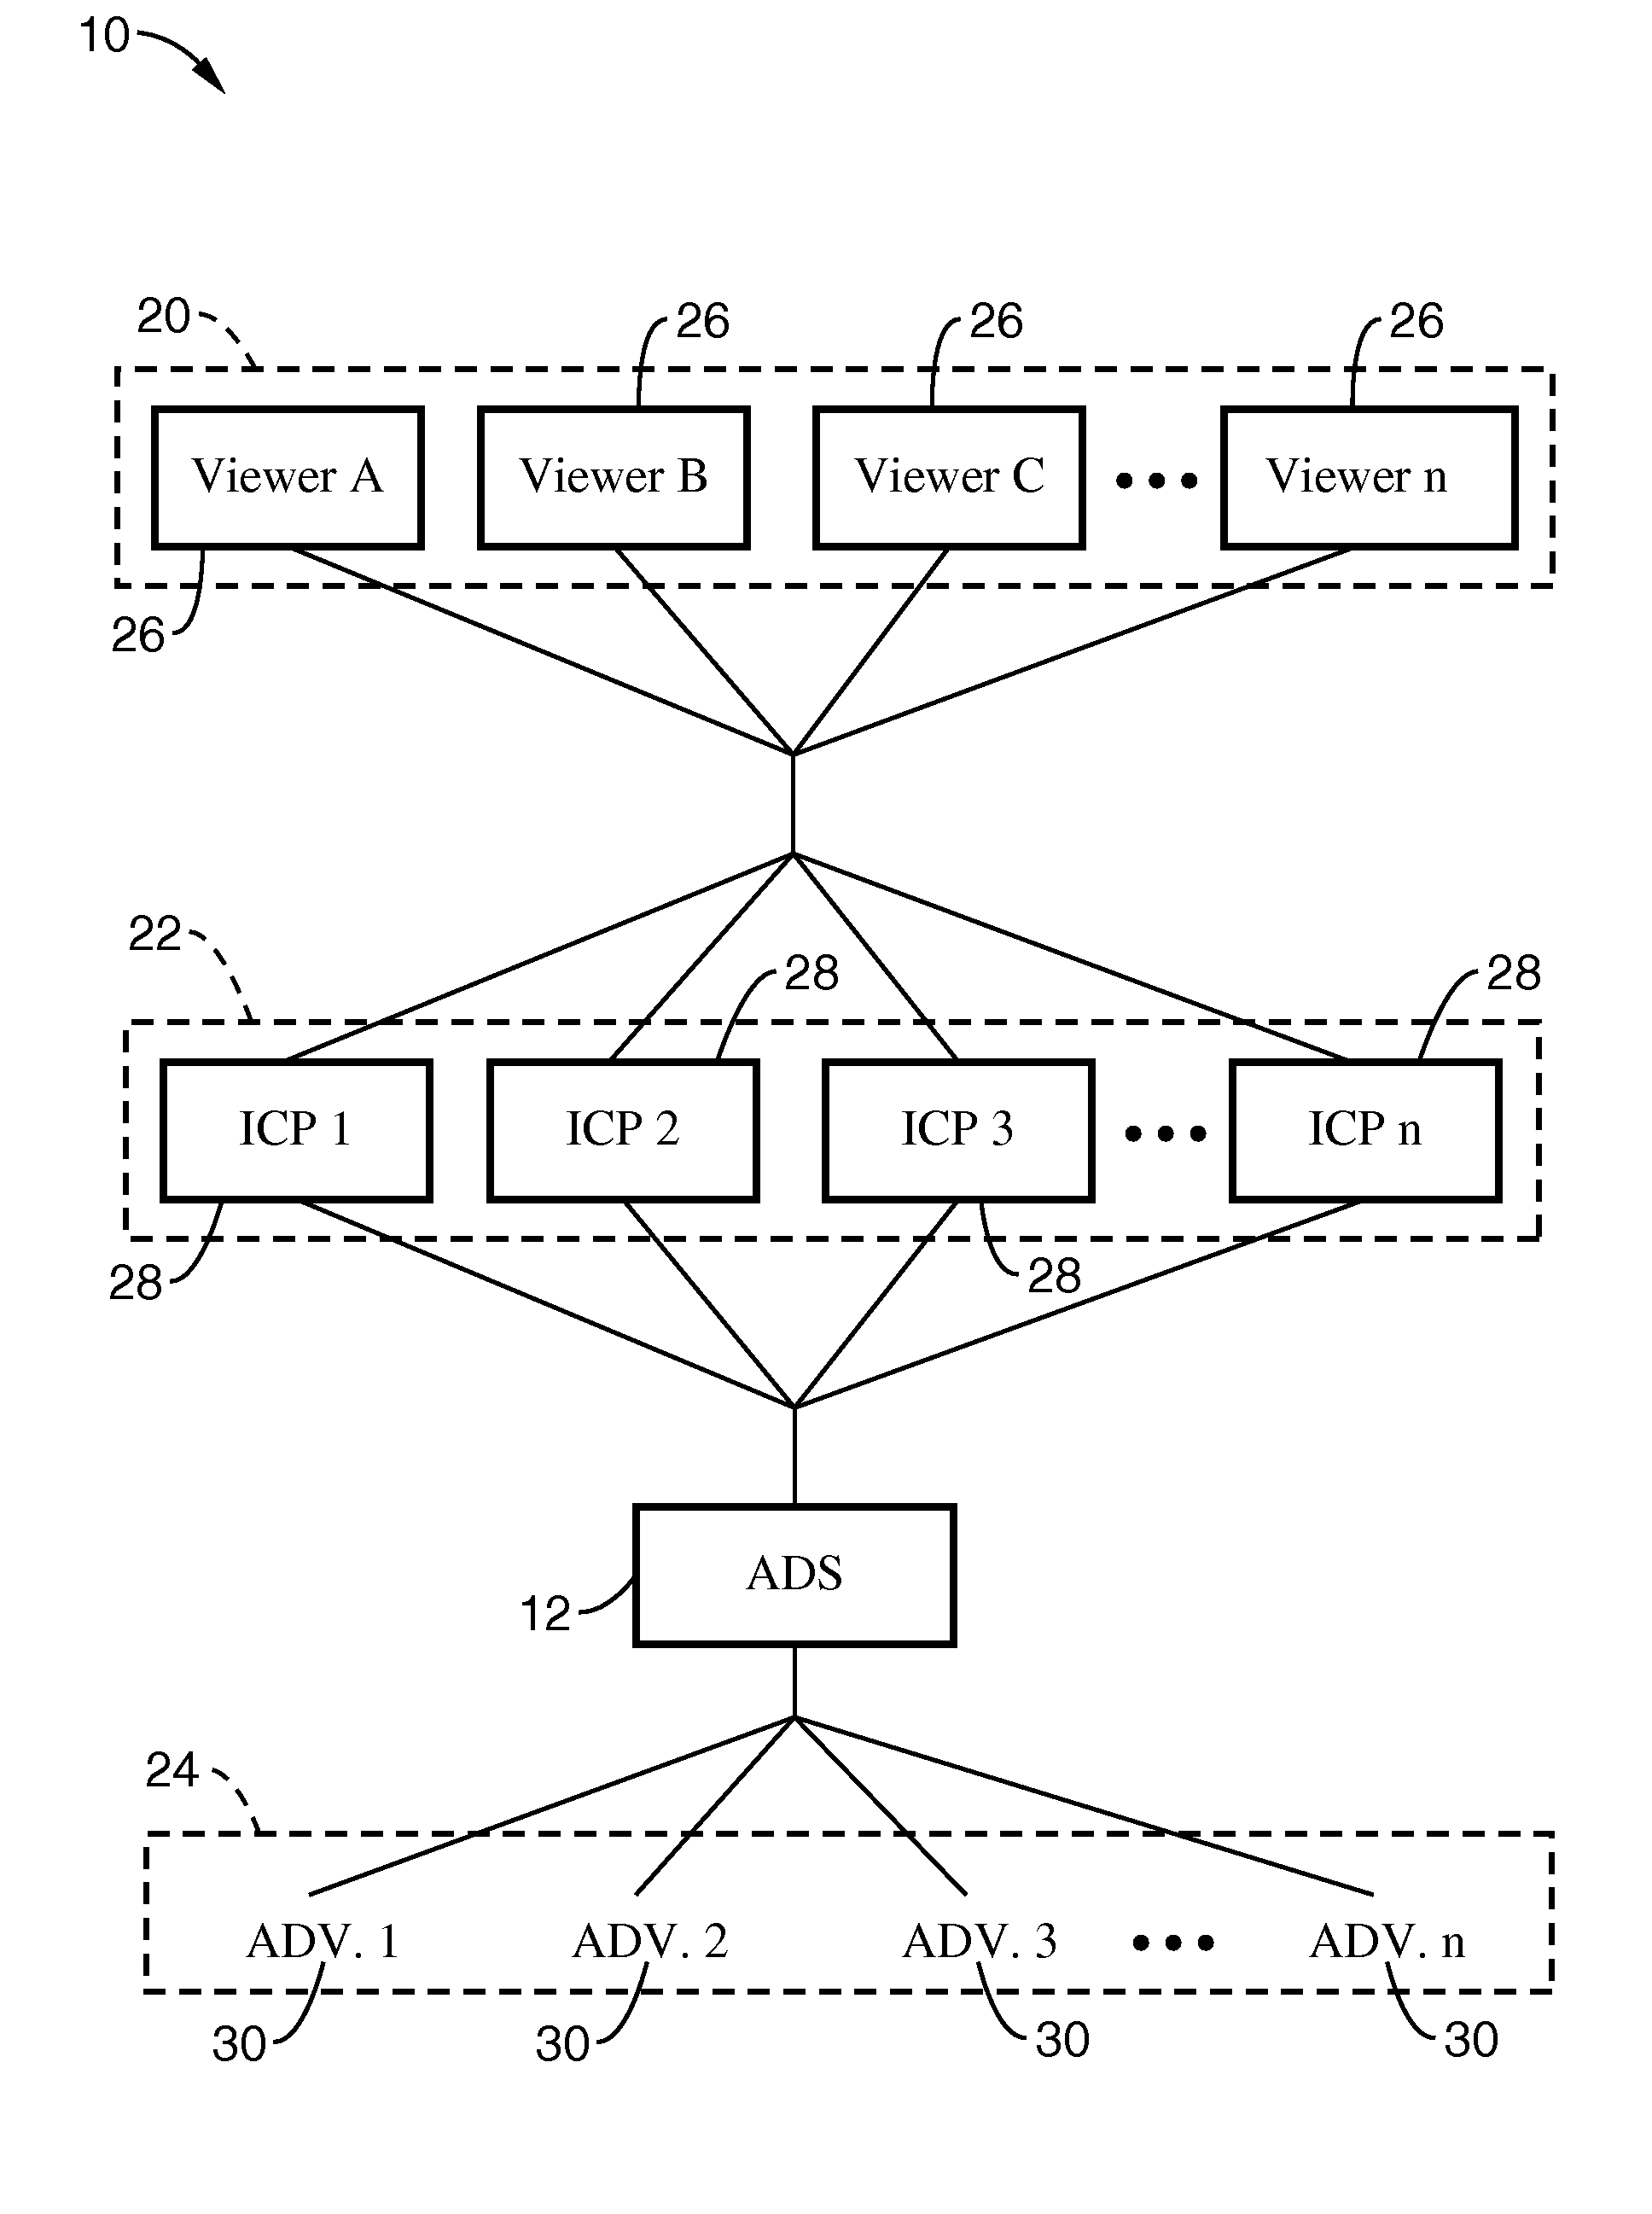 System and method for internet TV and broadcast advertisements